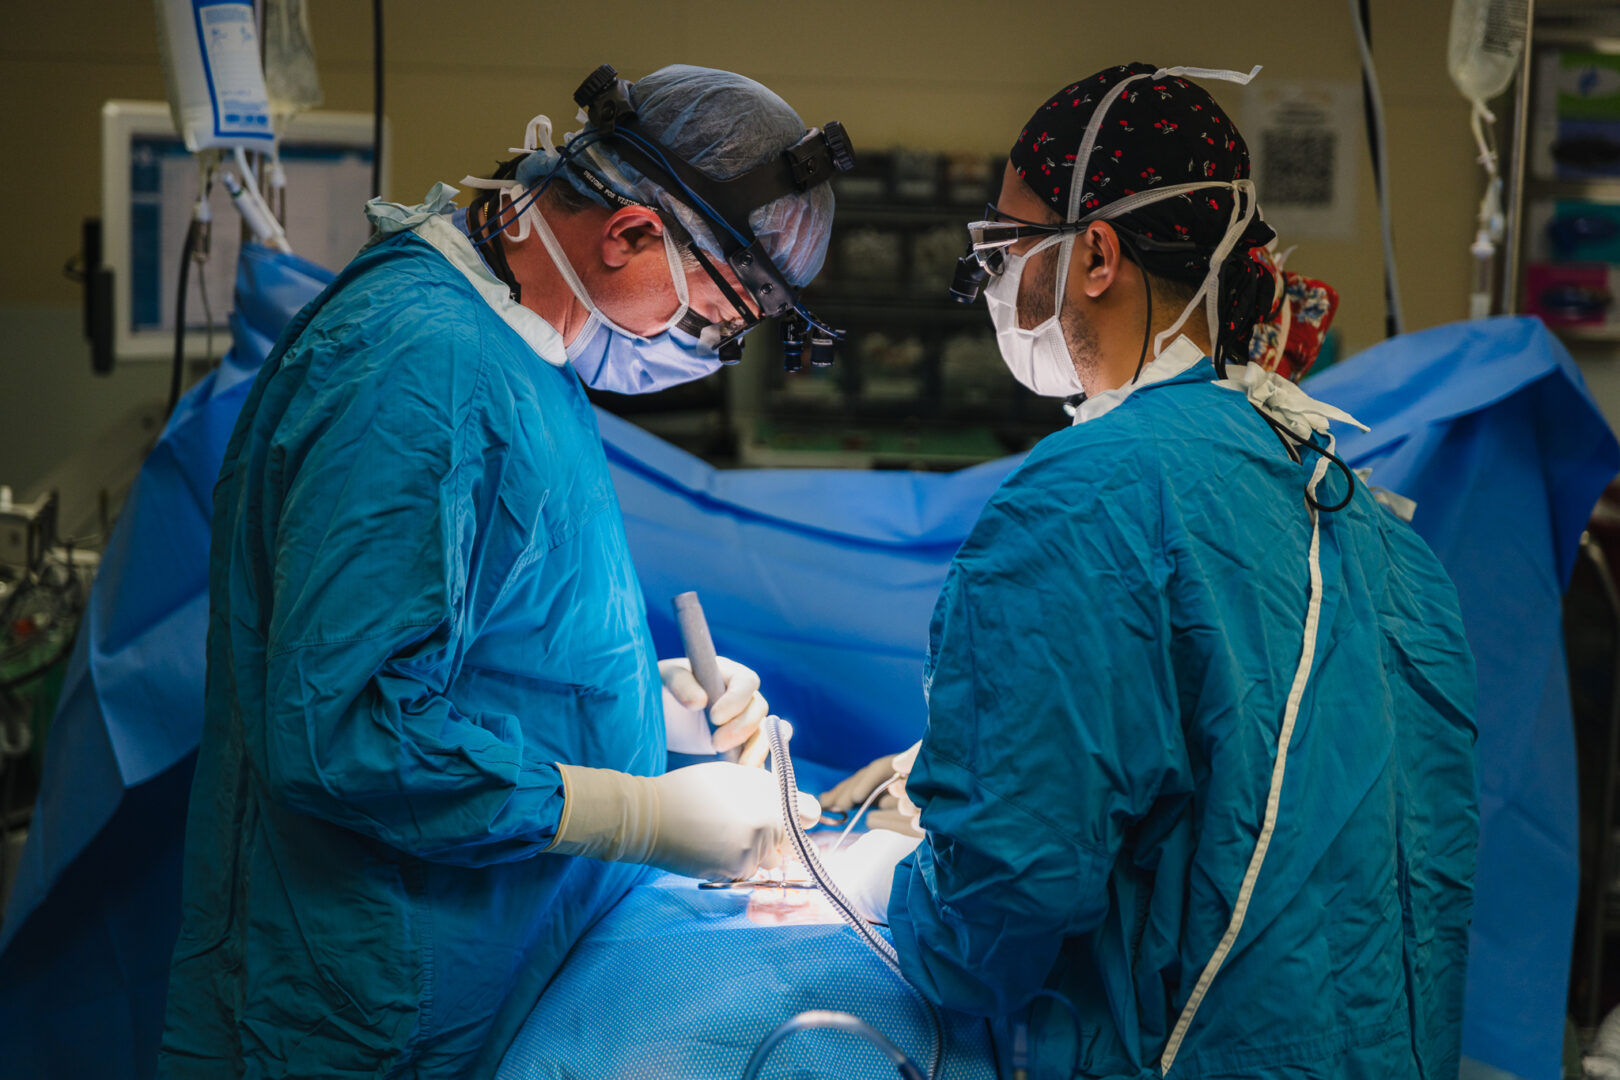 A surgeon operates on a patient, wearing a head camera